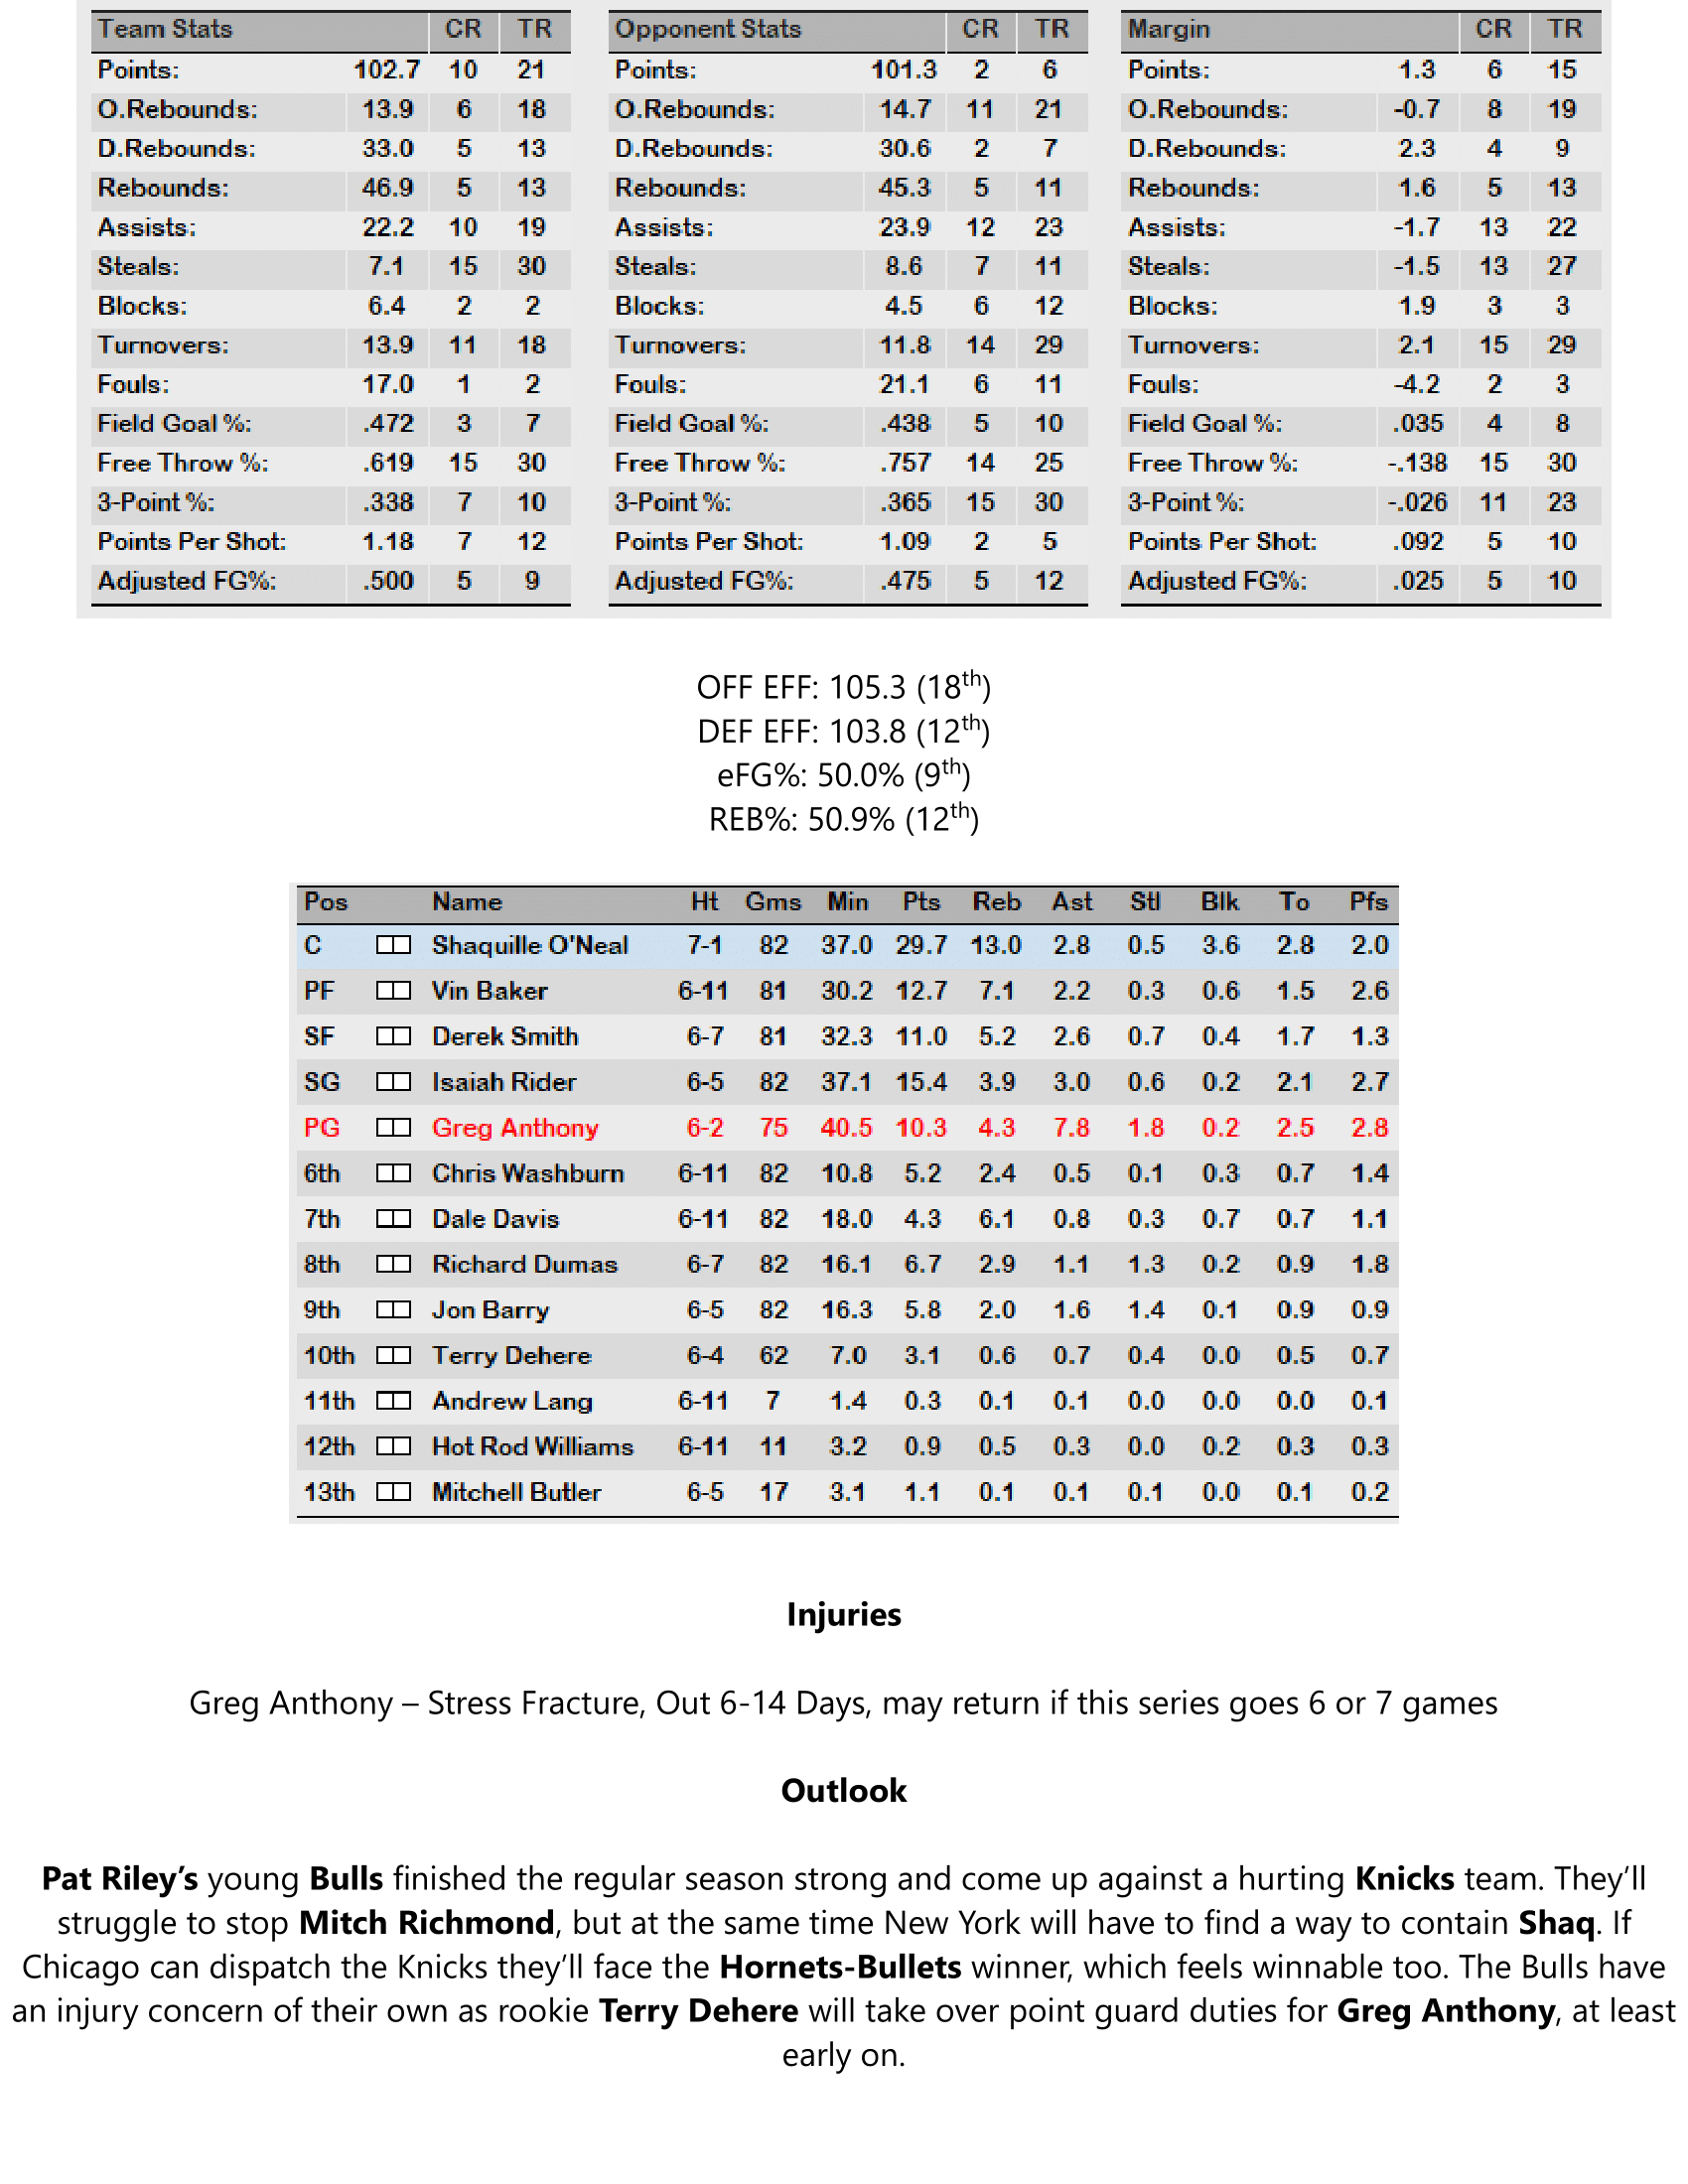 93-94-Part-4-Playoff-Preview-22.png